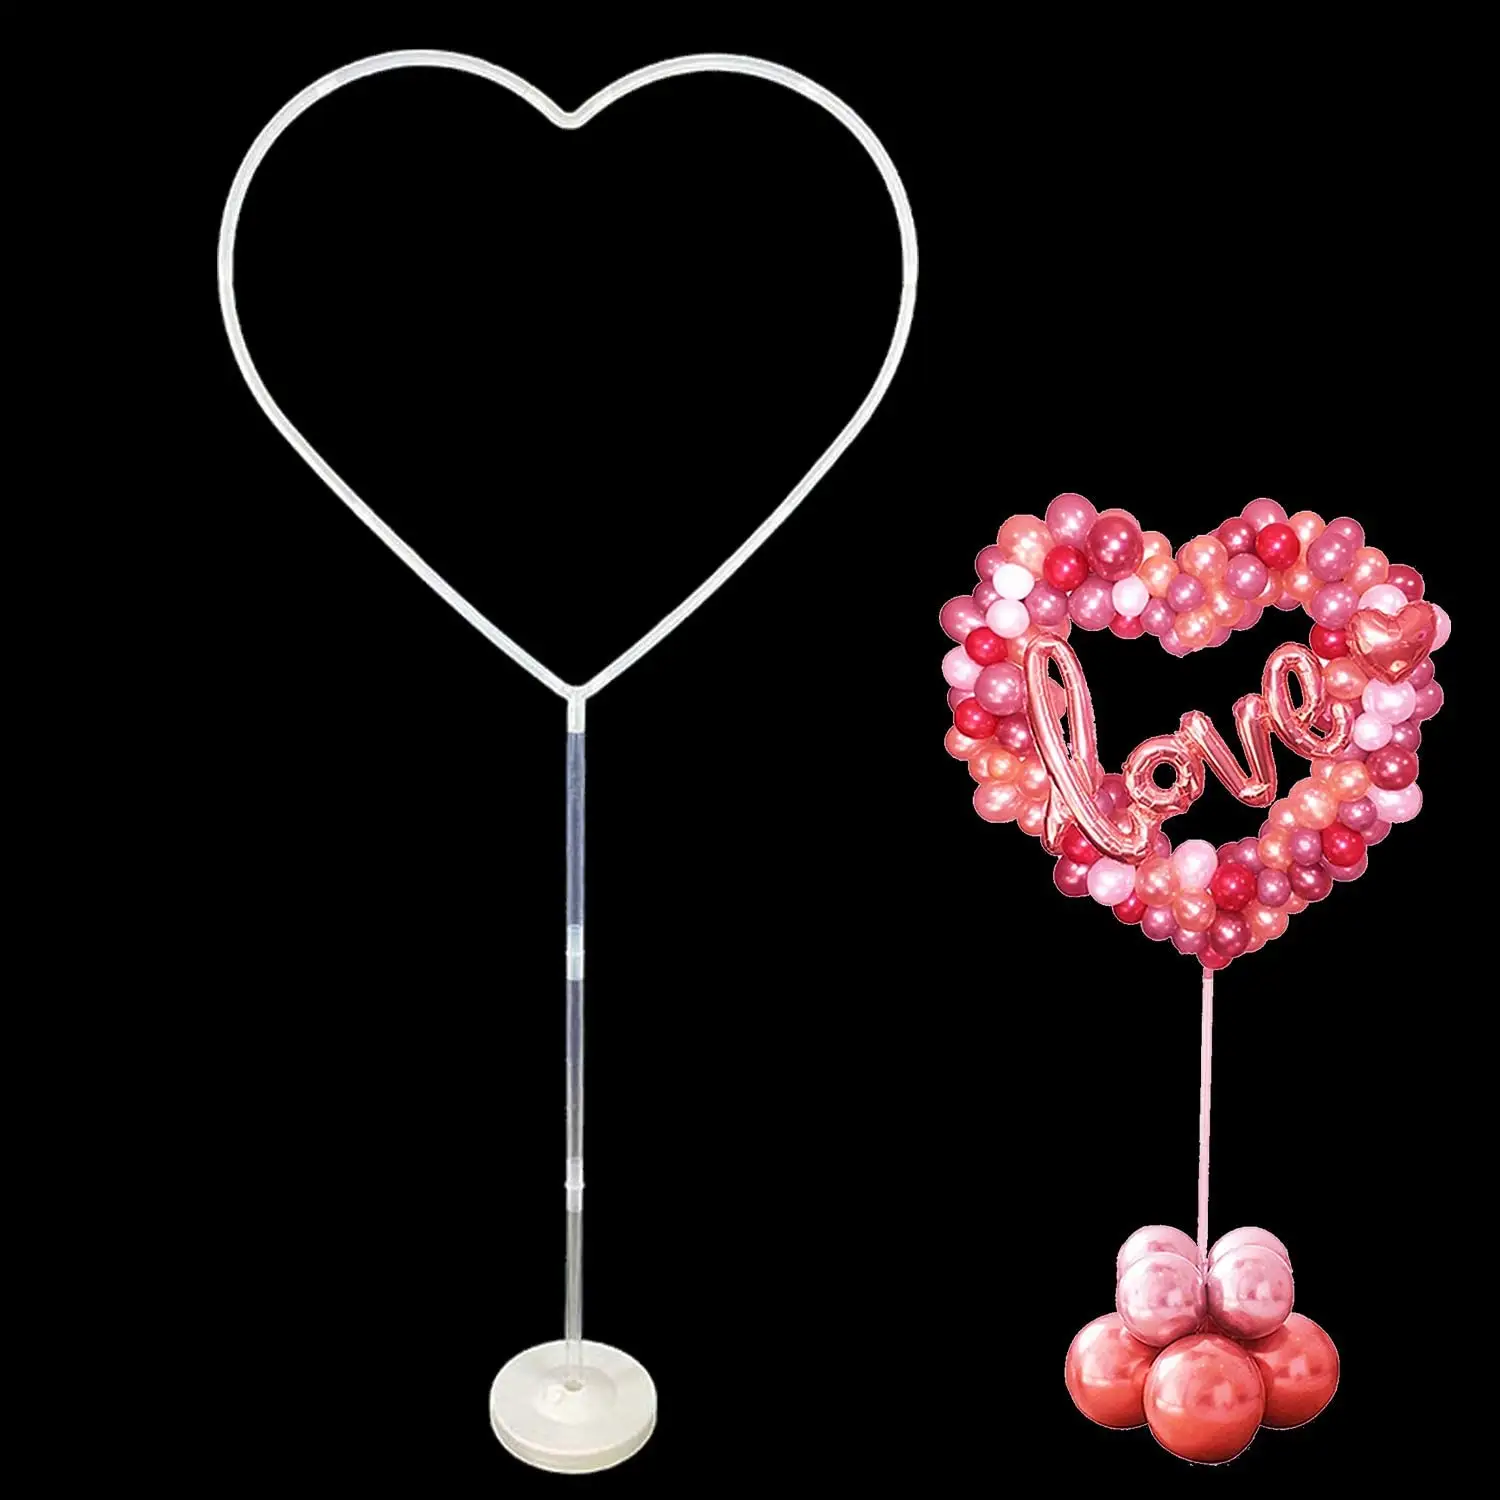 Balloon Stand Plastic Love Heart Circle Balloon Arch Column Holder for Baby Shower Birthday Wedding Party Balloon Decorations